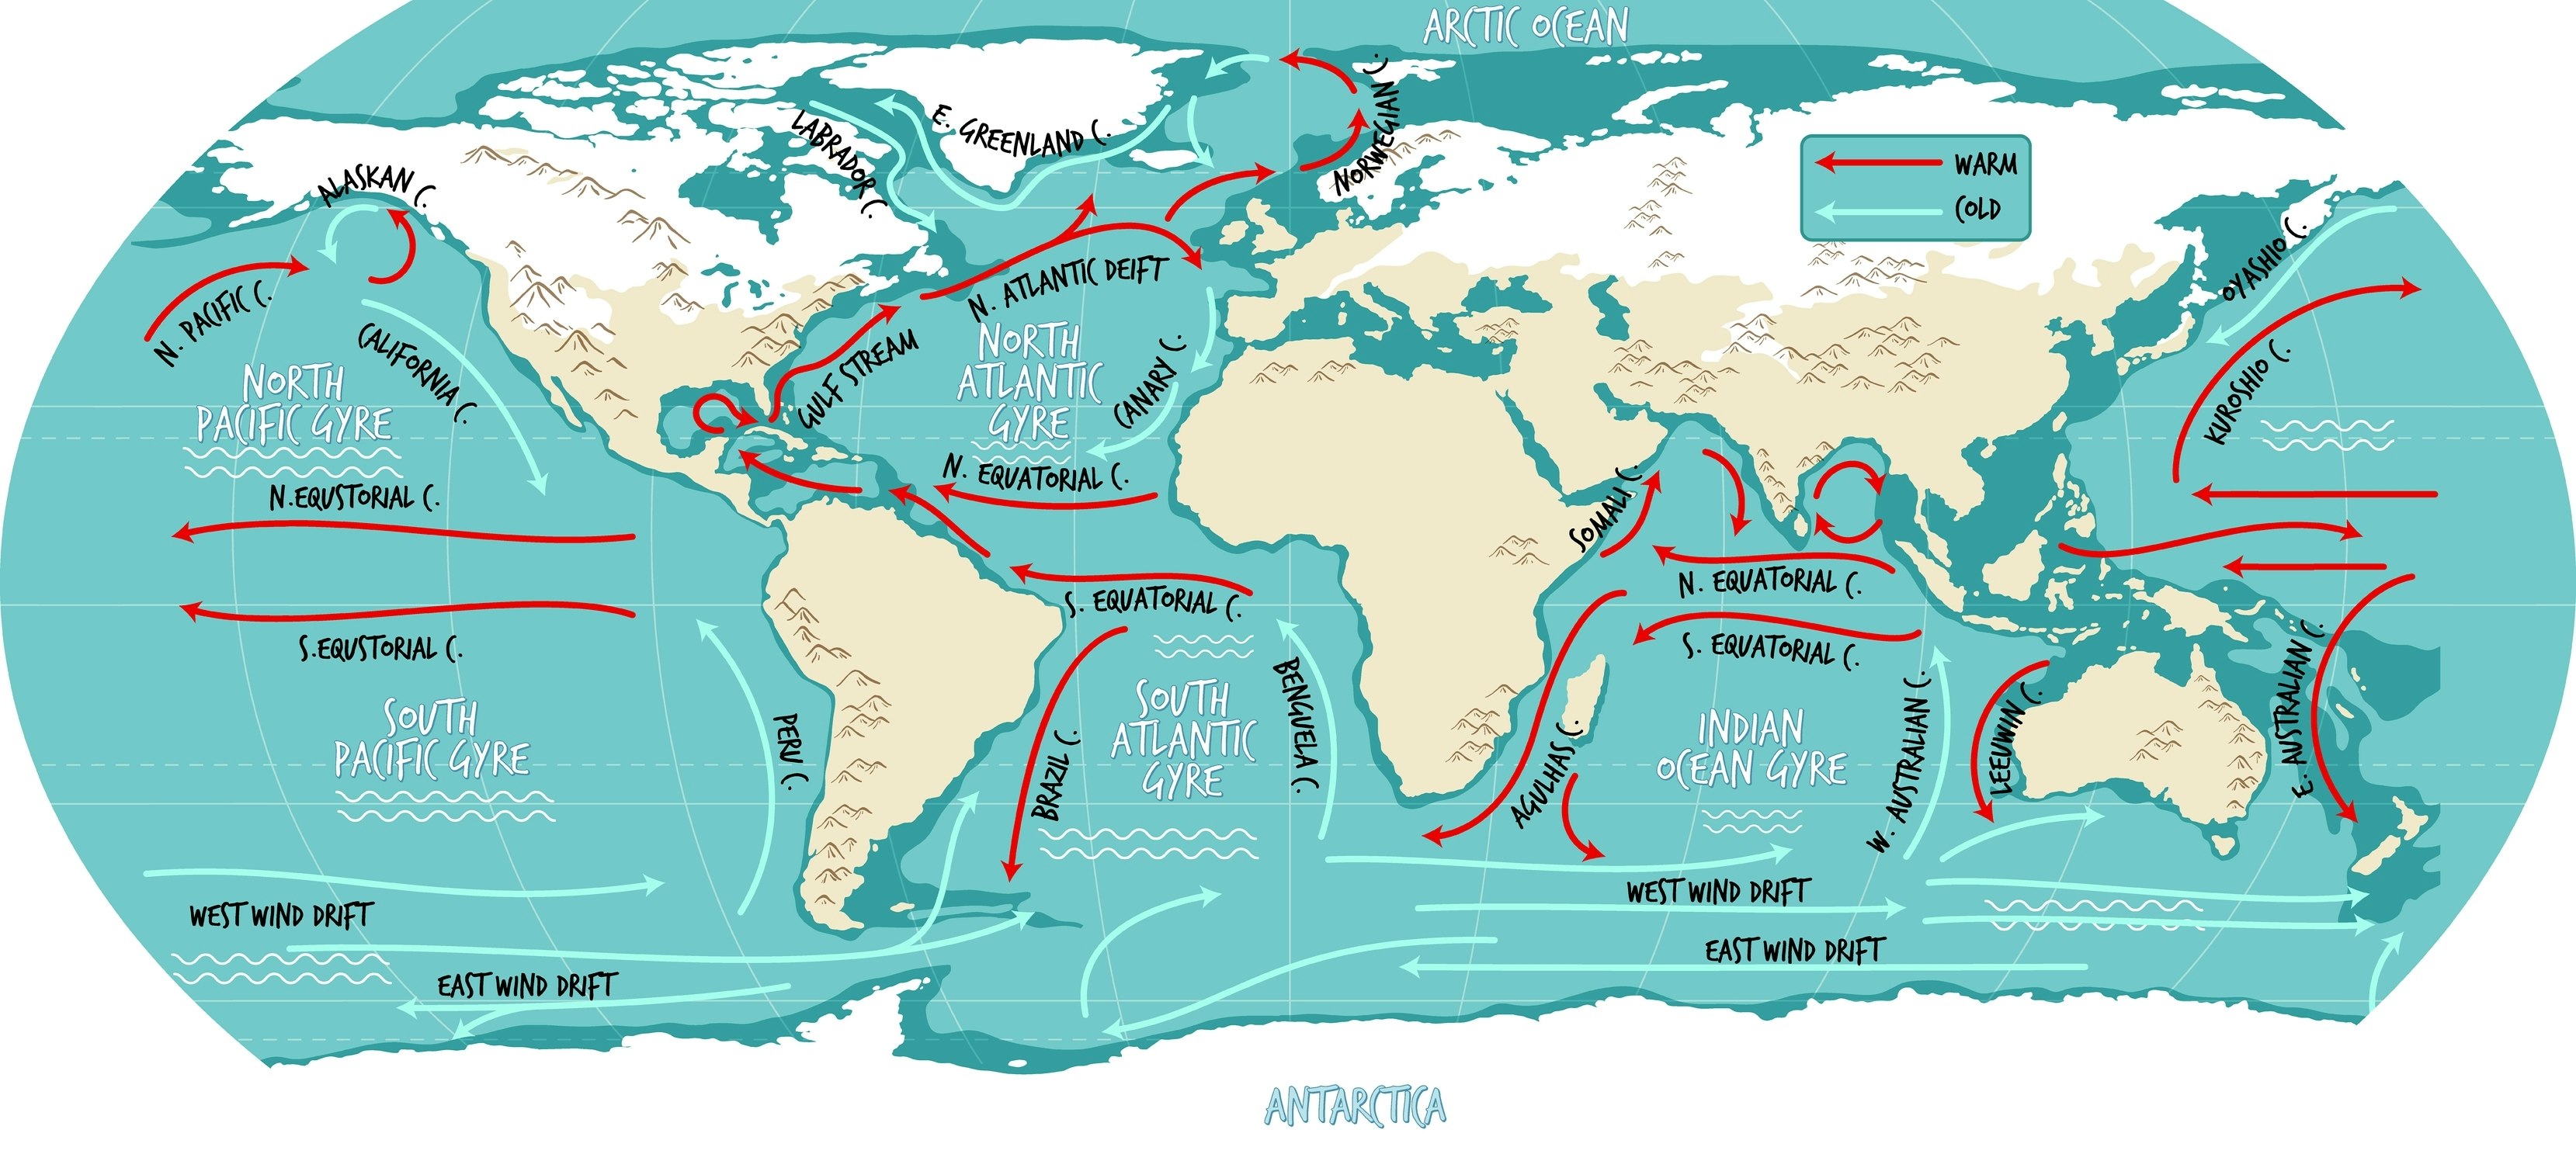 Illustrative world map of ocean currents with names.